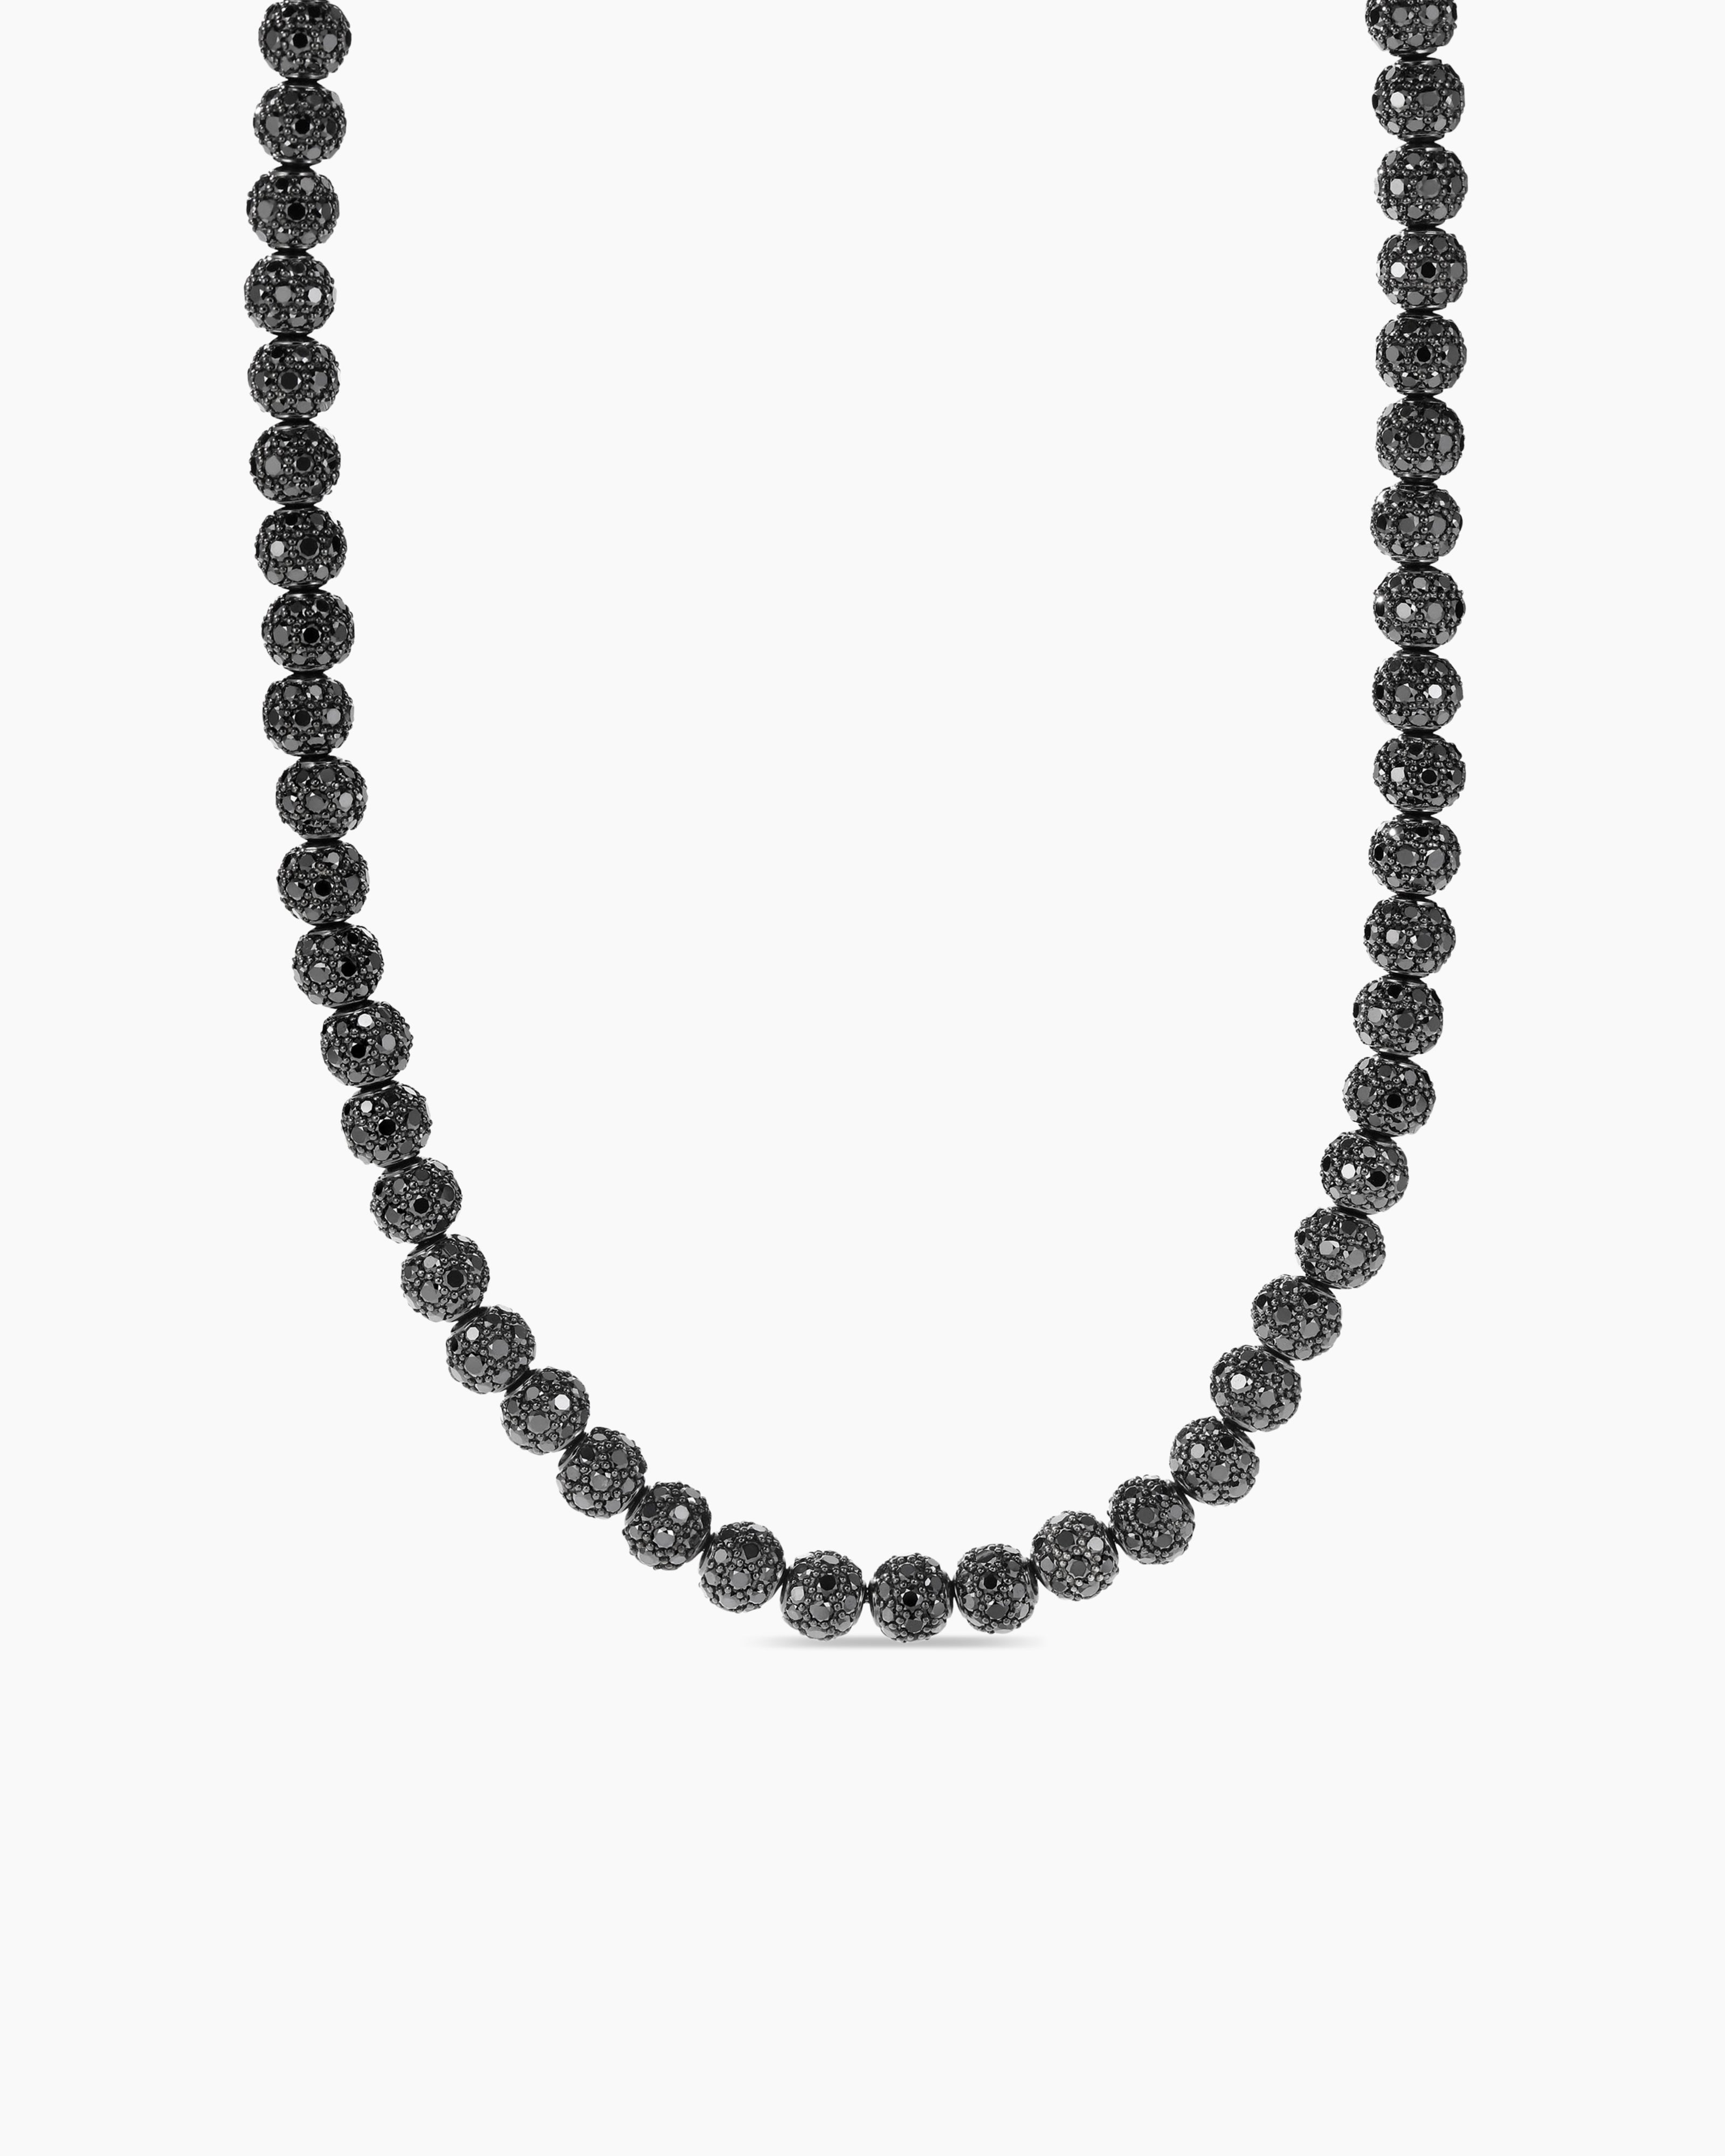 Goldiwala Stylish Black Heart necklace| silver chain| silver necklace|  with|| AD stone